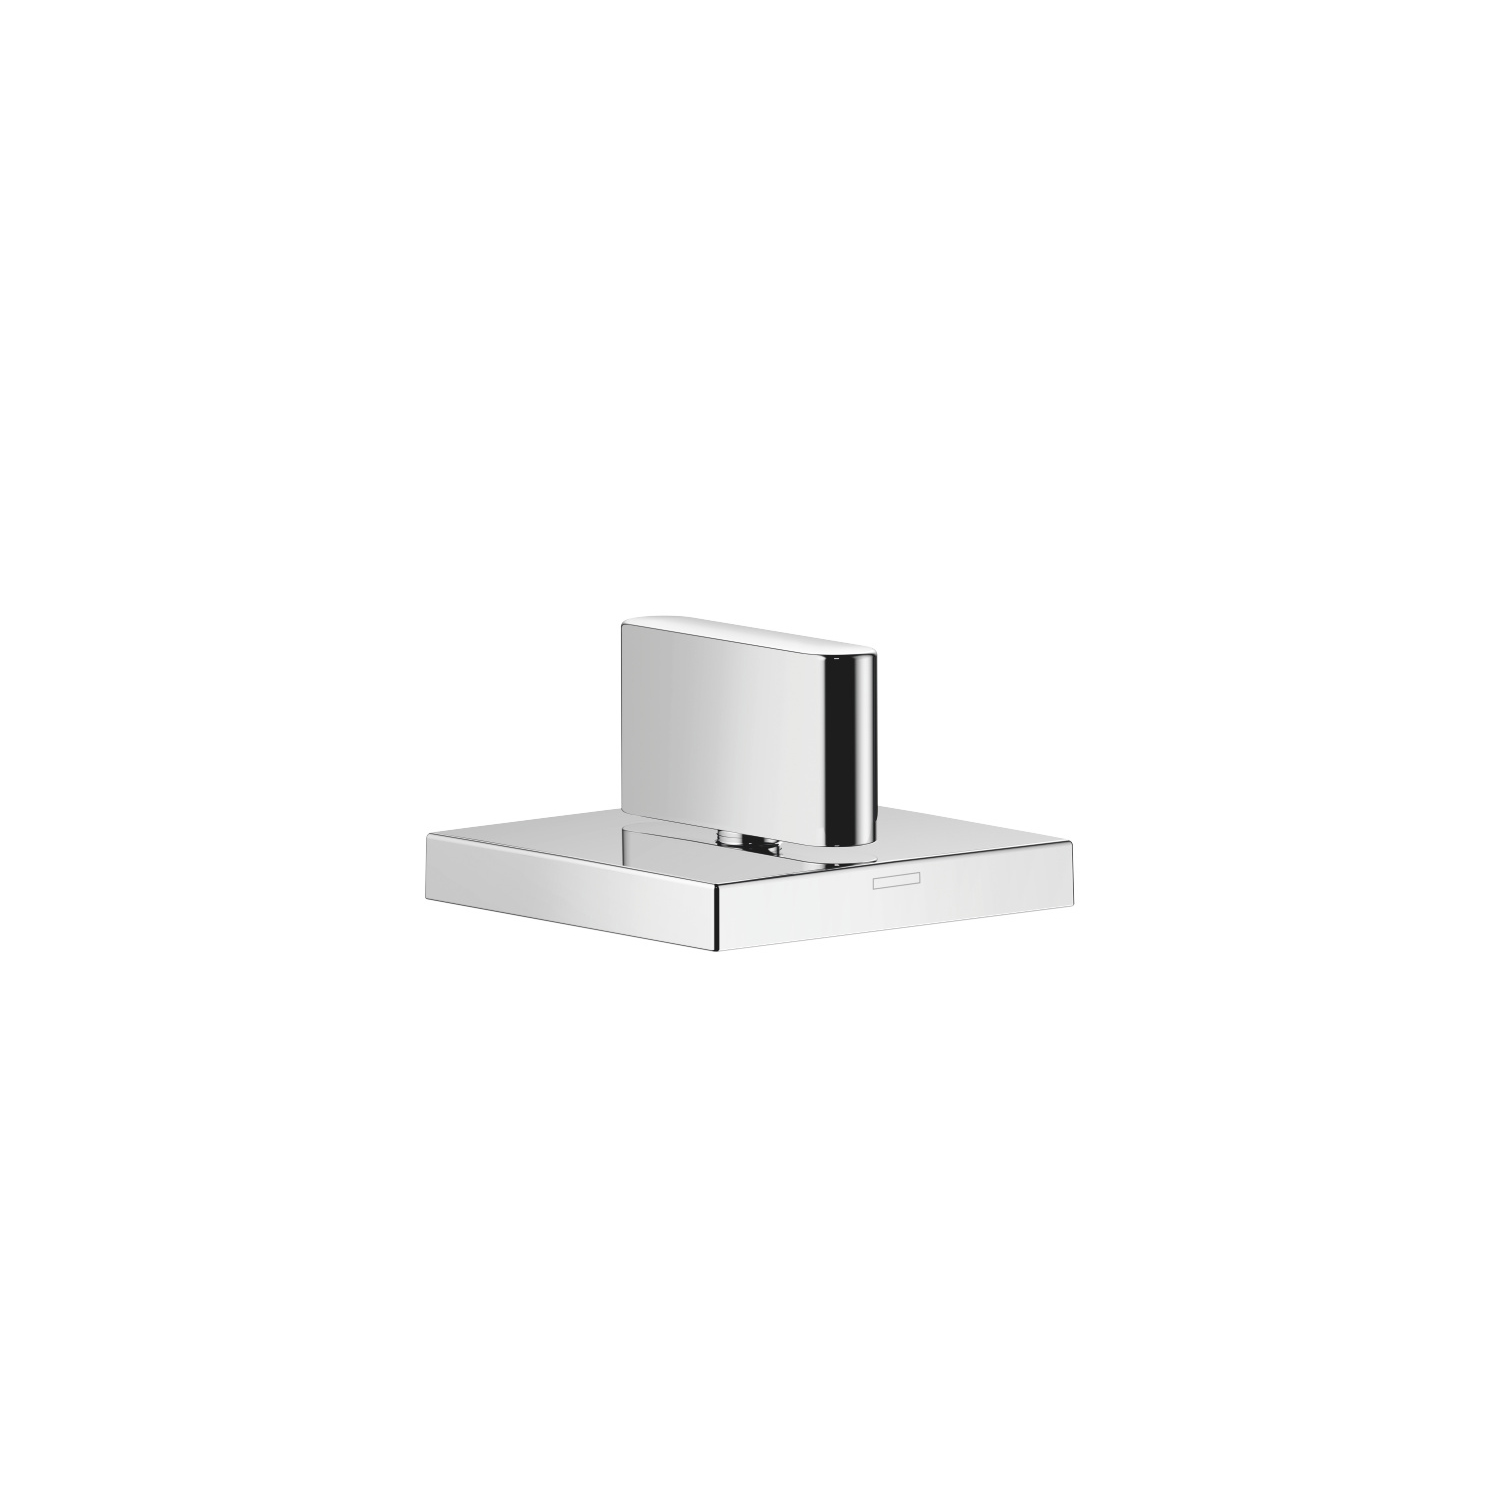 CL.1 Deck Mounted Thermostatic Valve-Cold In Polished Chrome